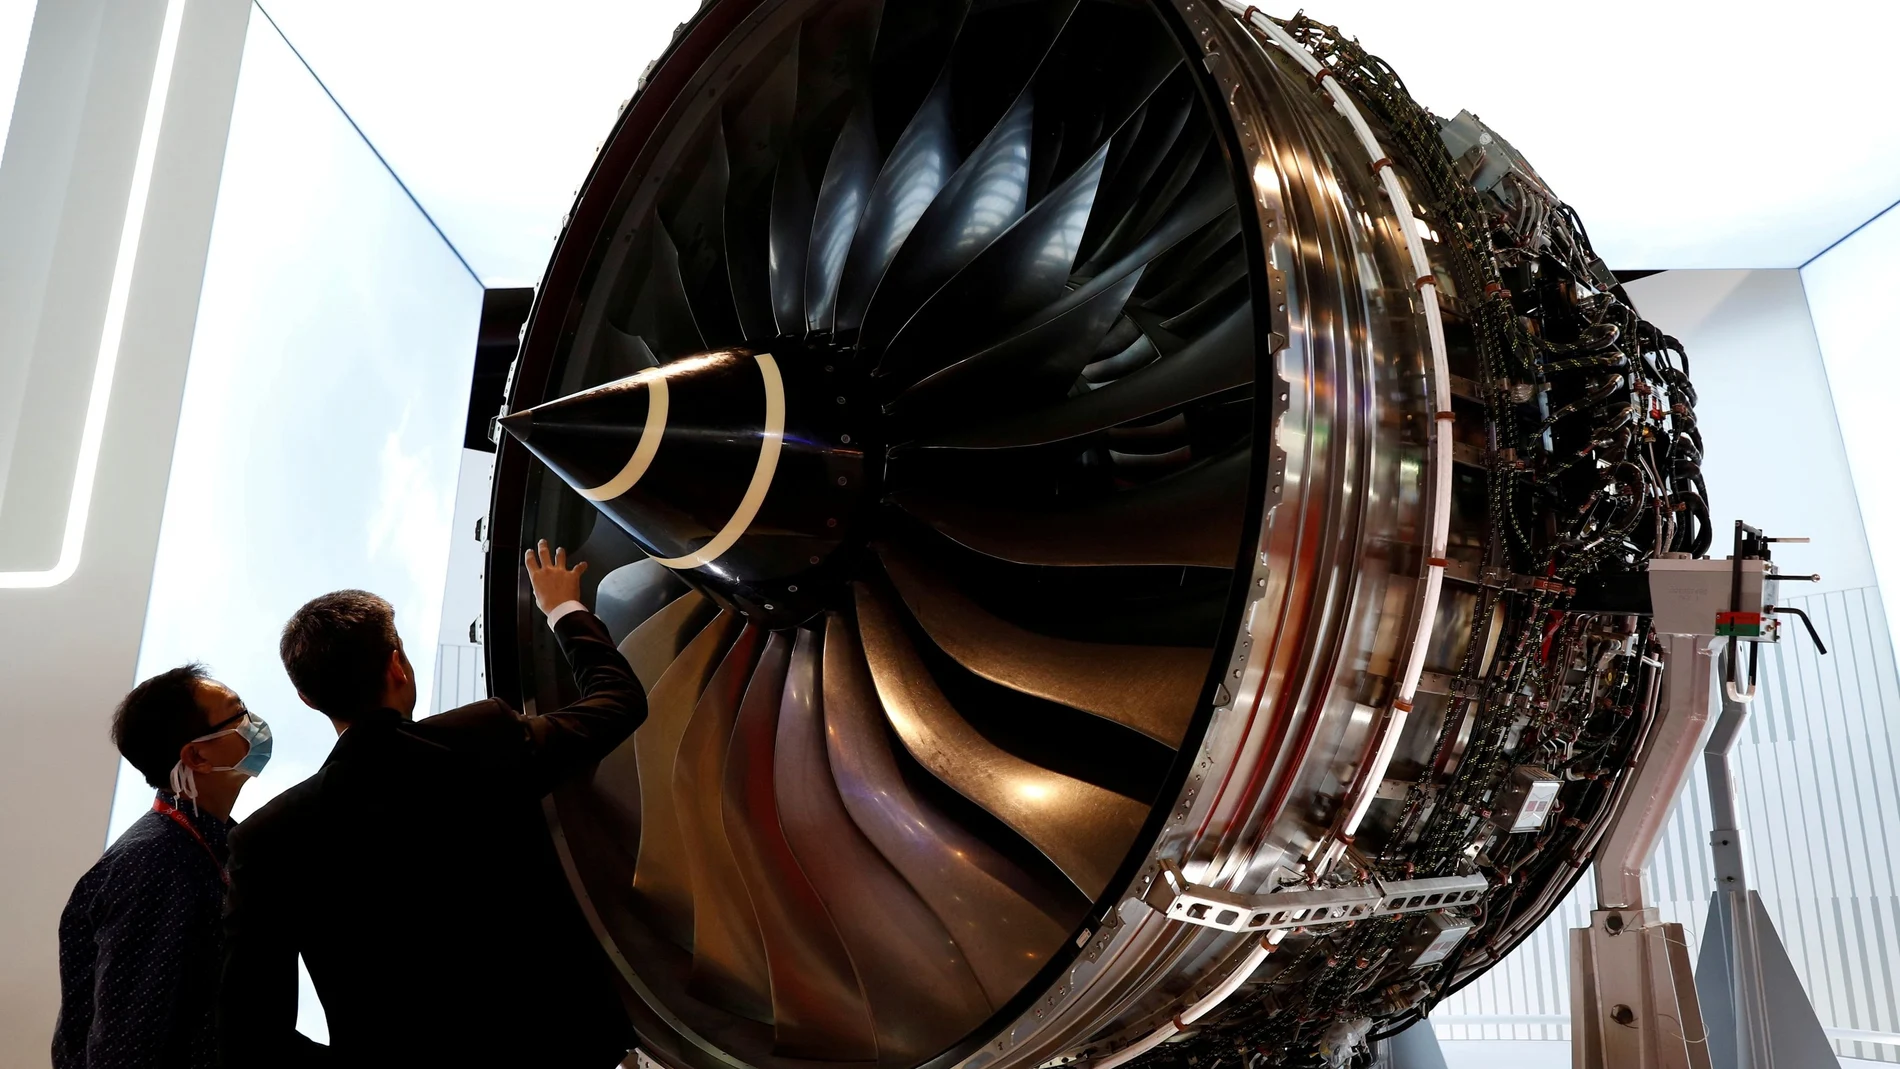 FILE PHOTO: A man looks at Rolls Royce's Trent Engine displayed at the Singapore Airshow in Singapore